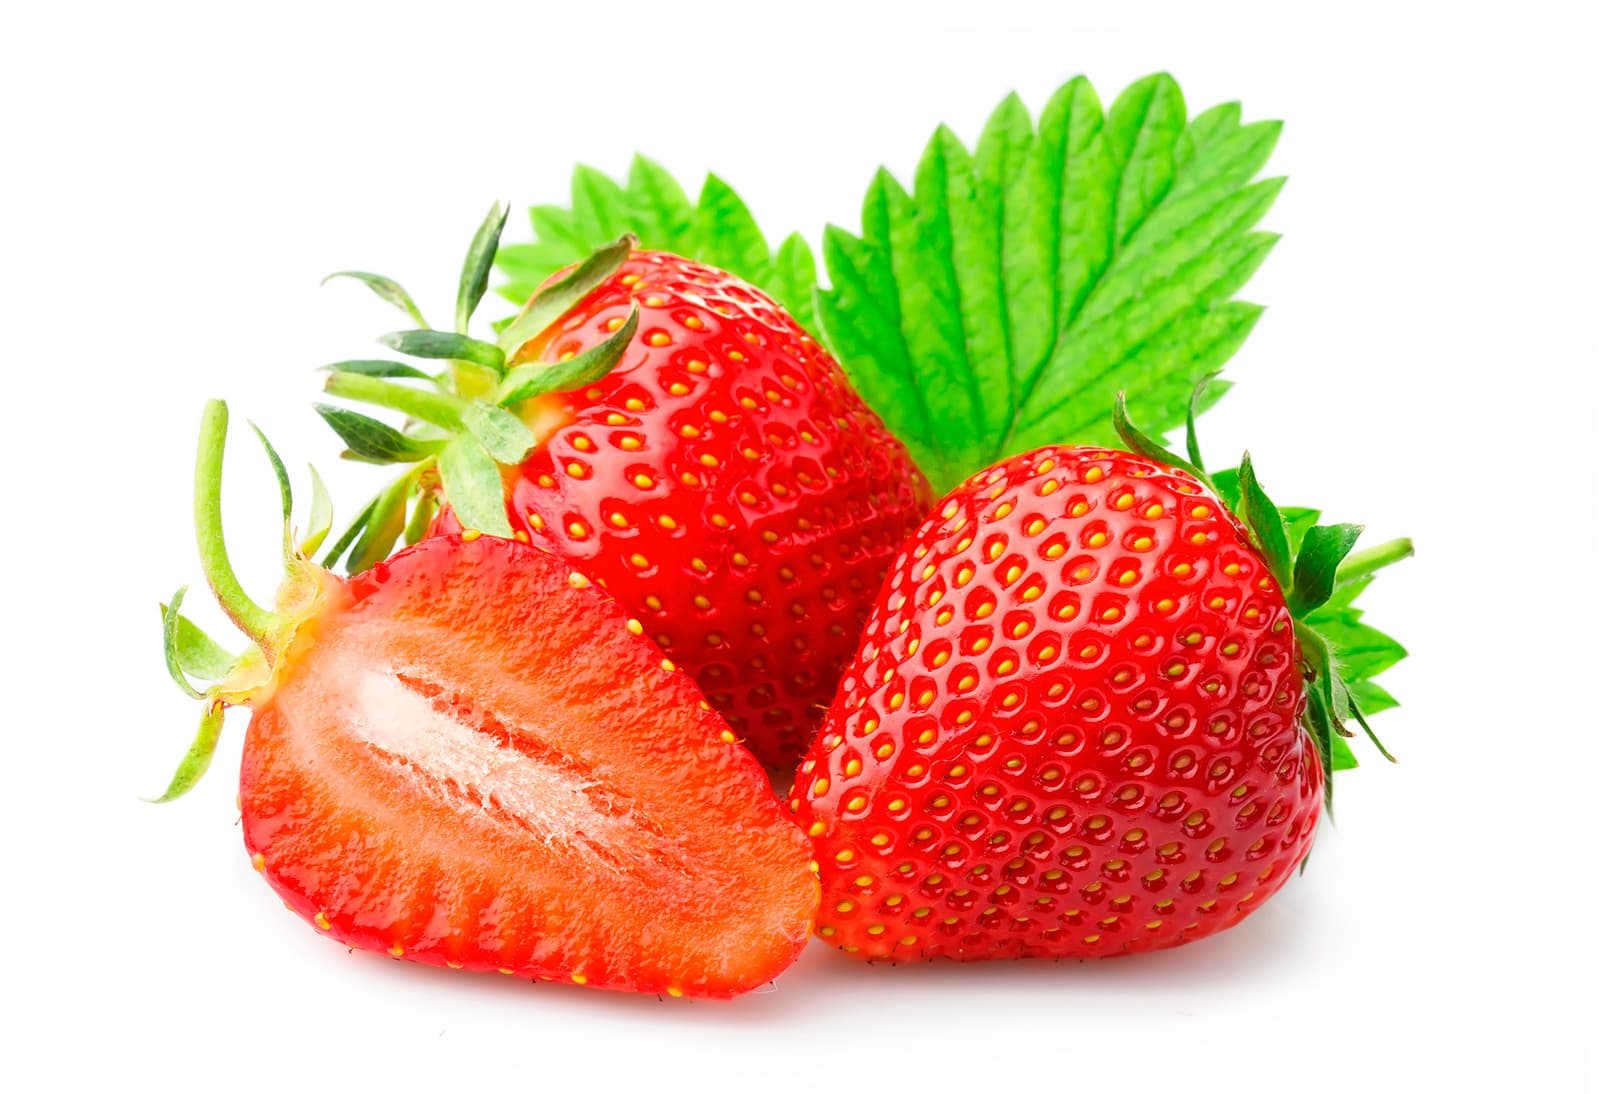 German consumer campaign launched against “drought strawberries” from Doñana 